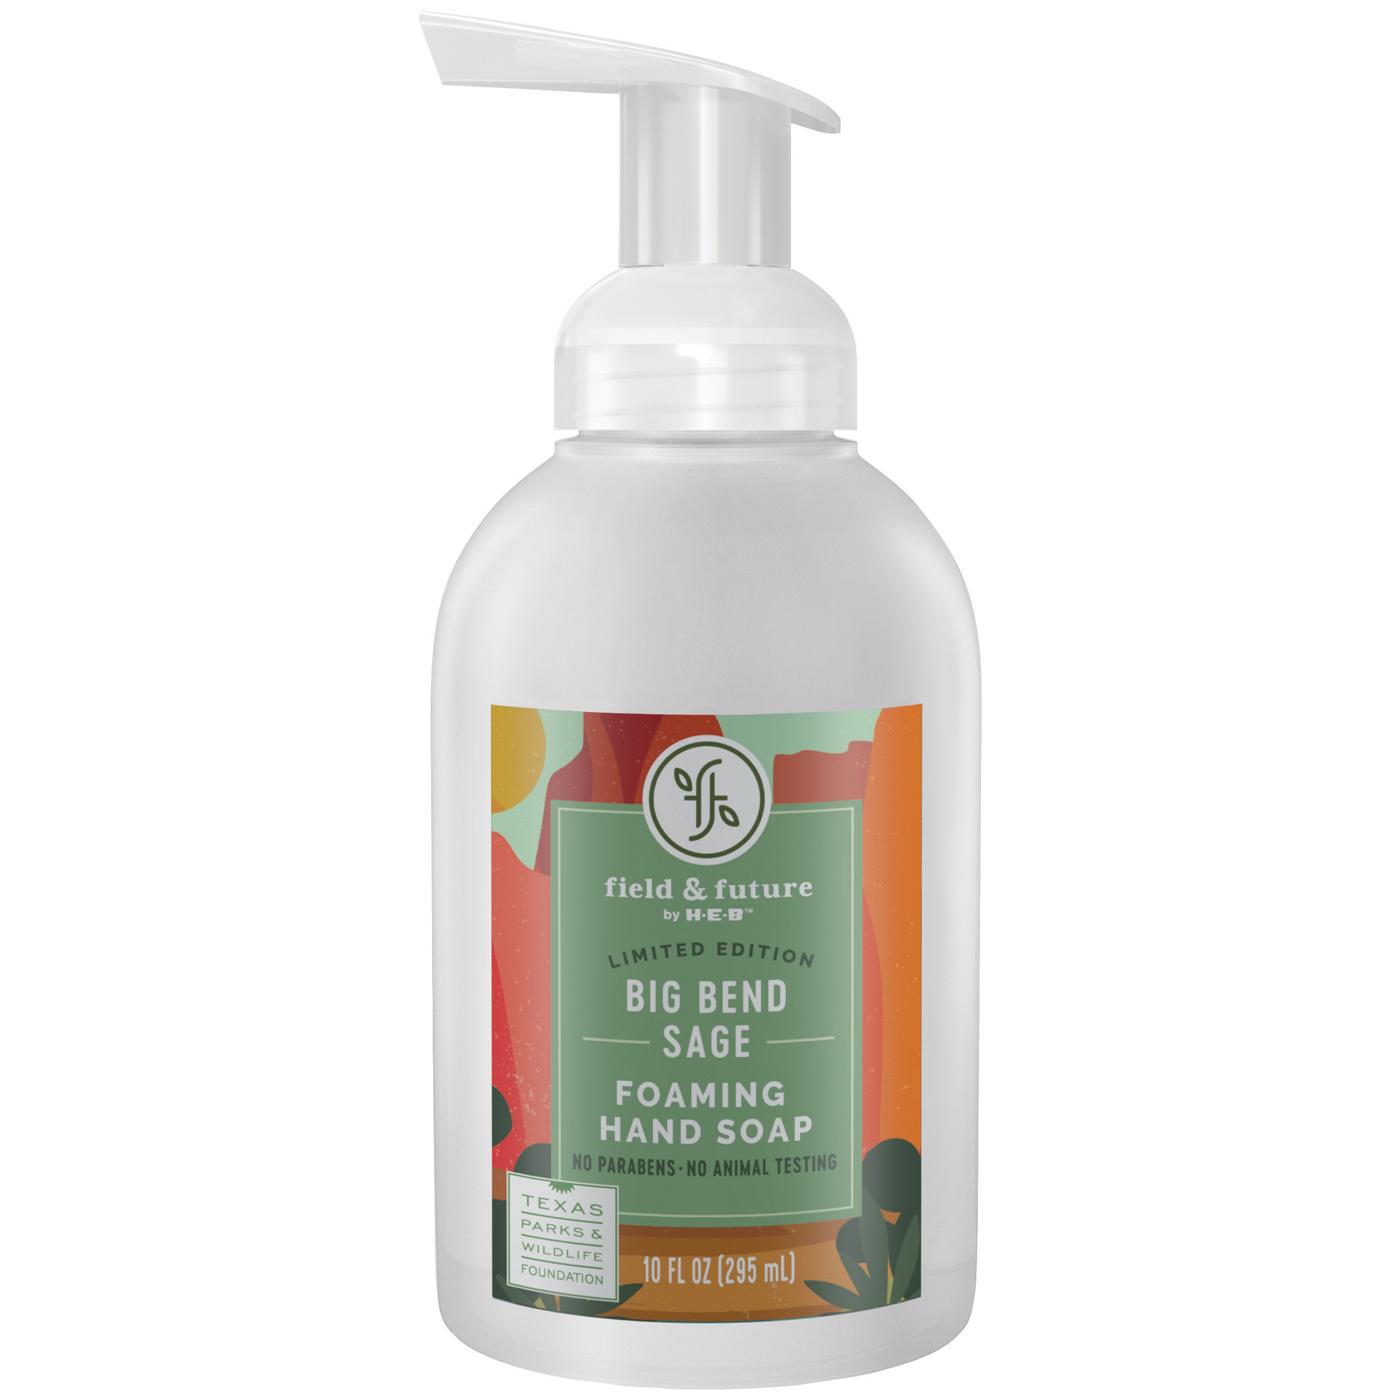 Field & Future by H-E-B Foaming Hand Soap - Big Bend Sage; image 1 of 3